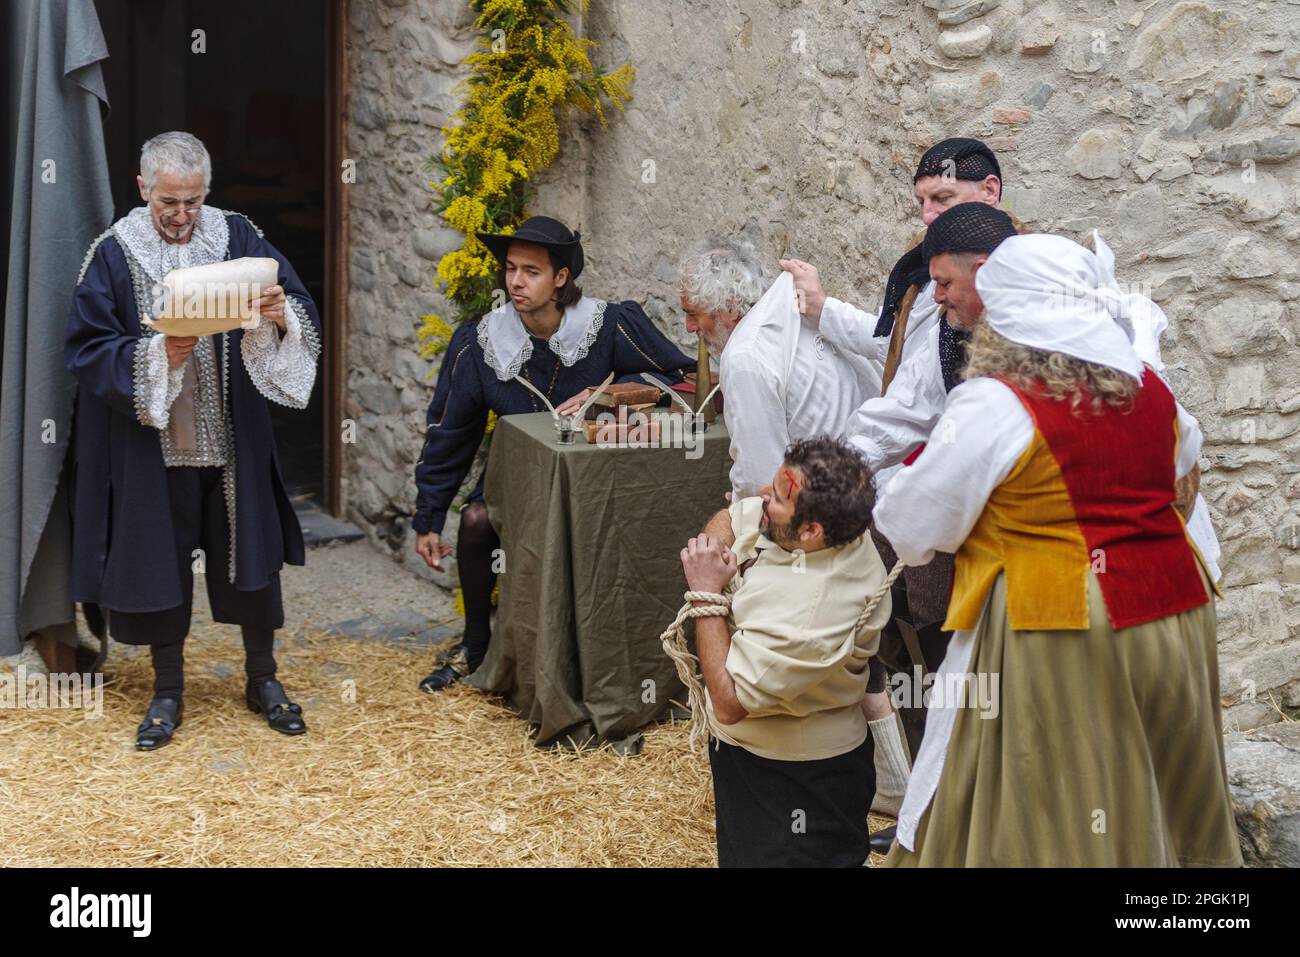 Historical reenactment in the old town of Taggia, Liguria region of Italy Stock Photo